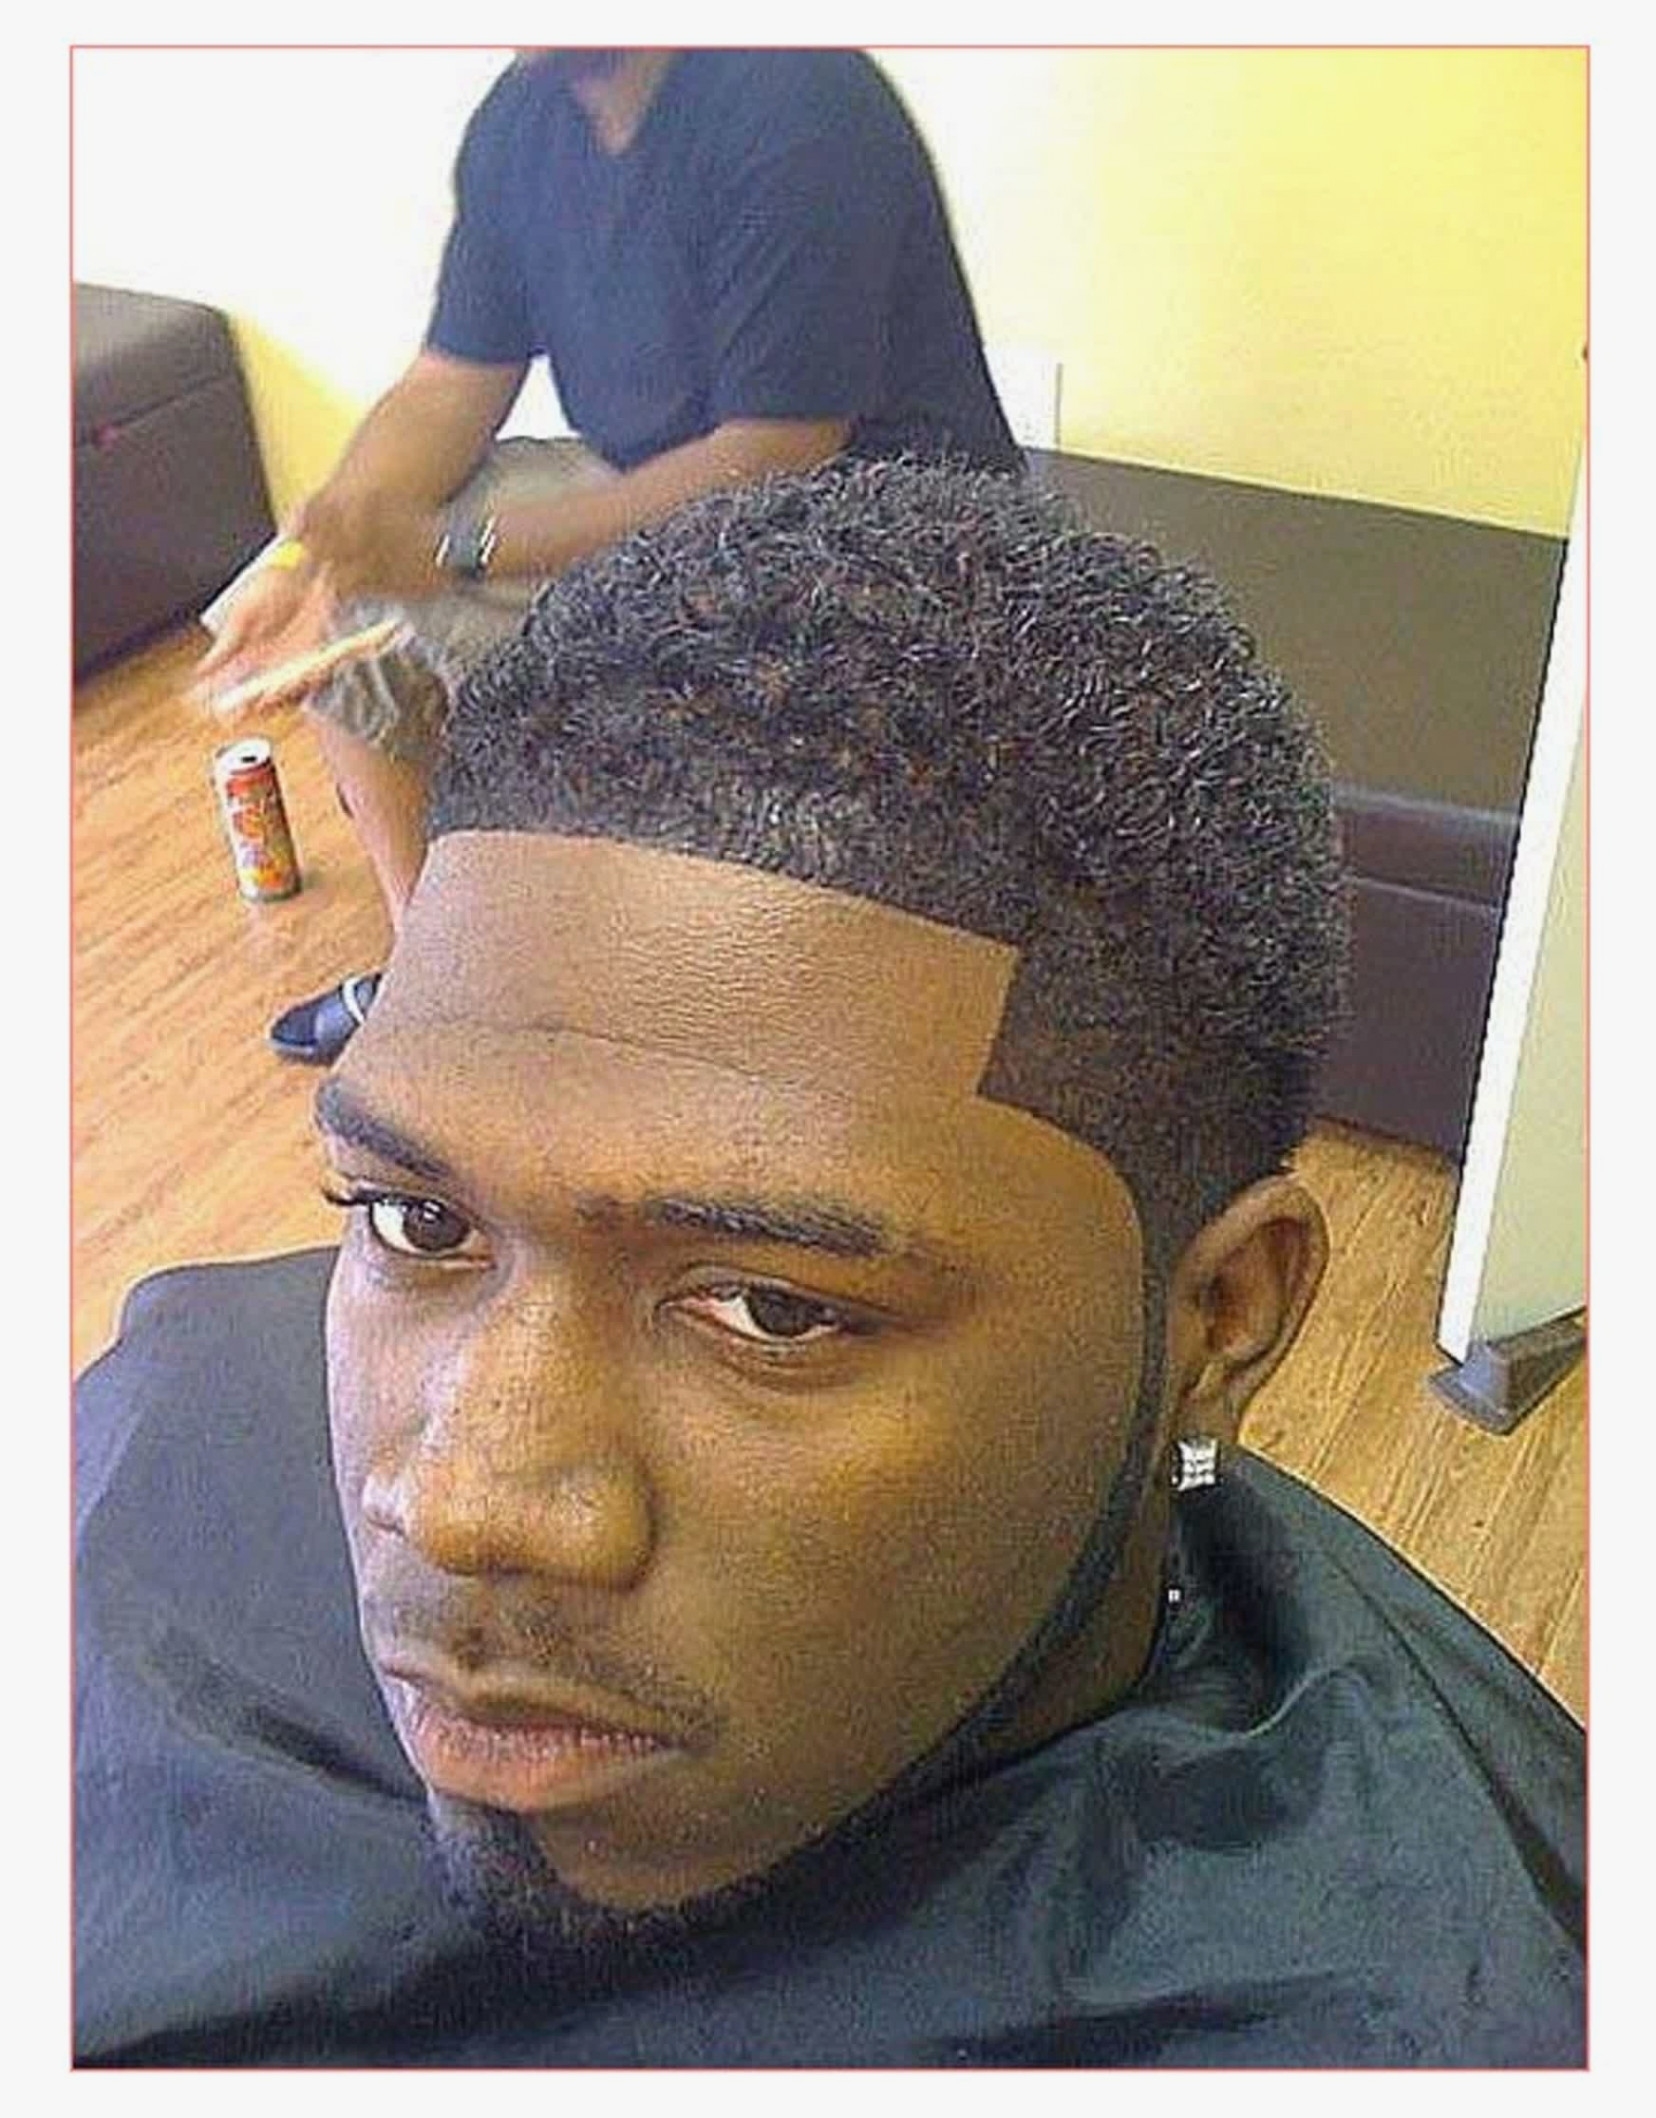 Haircuts For Black Men With Thinning Hair Awesome Receding Hairline pertaining to Haircut For Thinning Hair Black Male